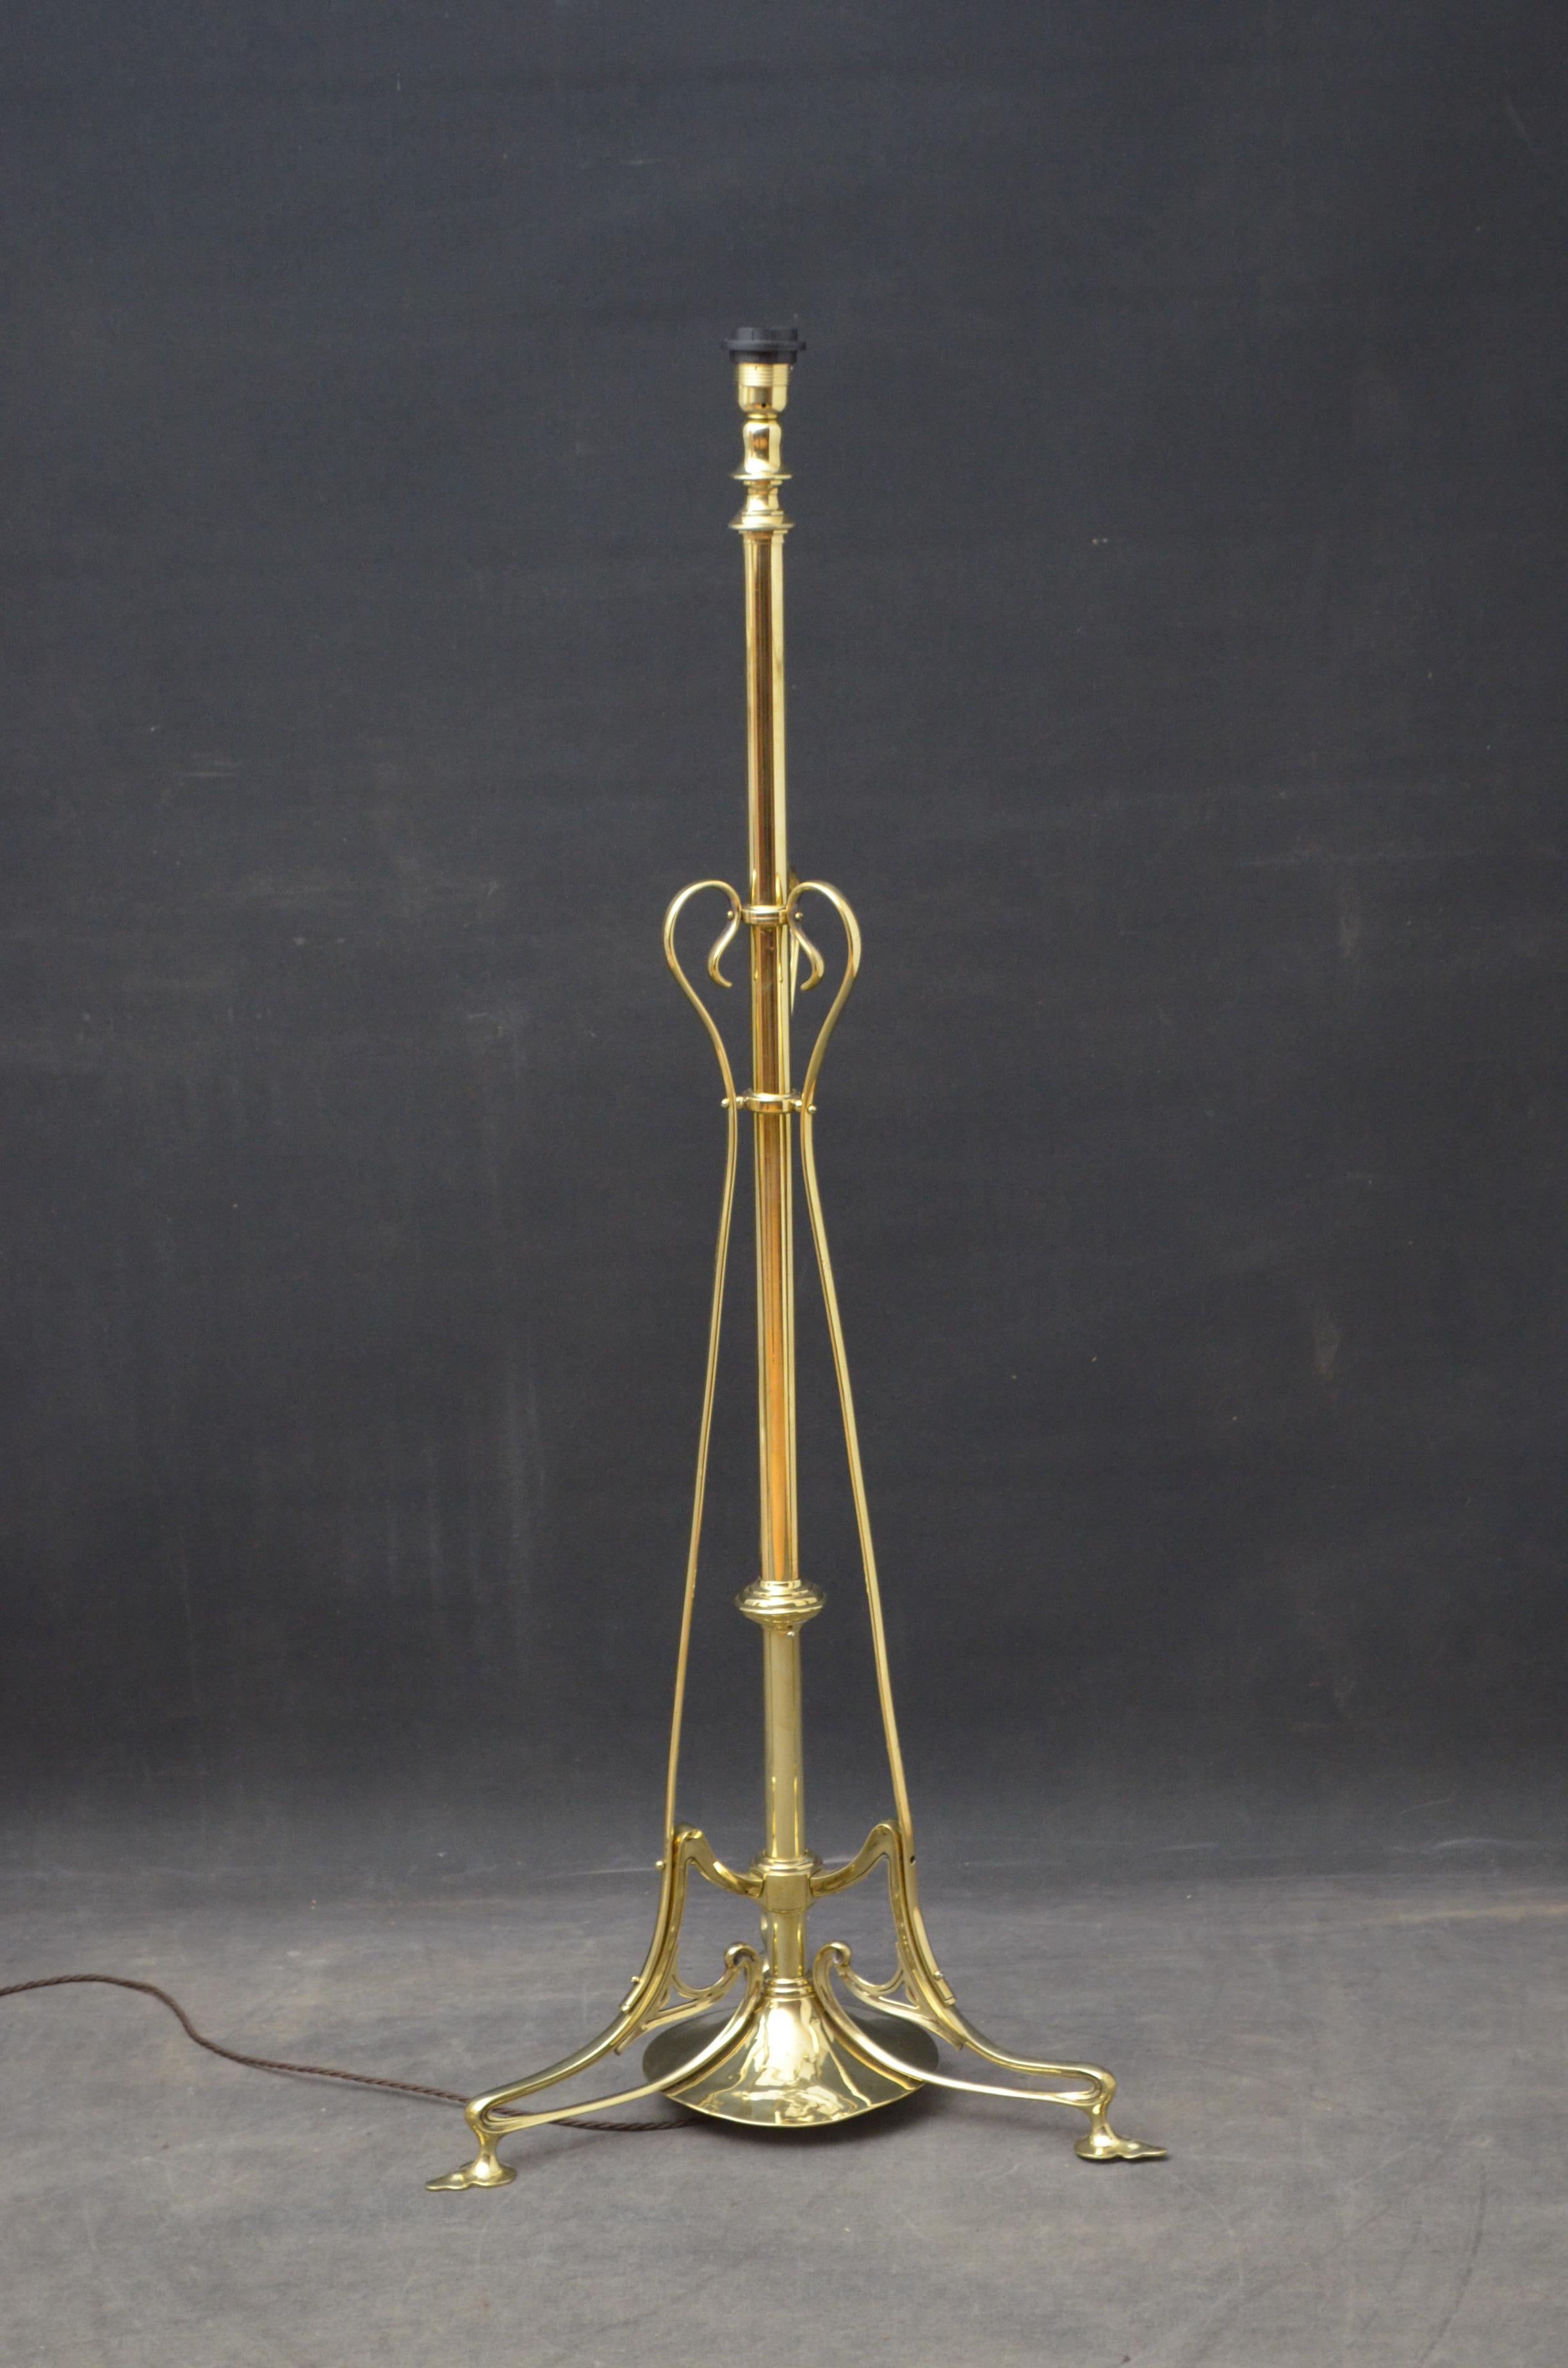 Sn4800 elegant Art Nouveau brass standard, telescopic lamp with 3 shaped uprights, circular base and pad feet. This lamp has been rewired and is ready to use at home. Lampshade not included, circa 1900
Measures: H 49-74